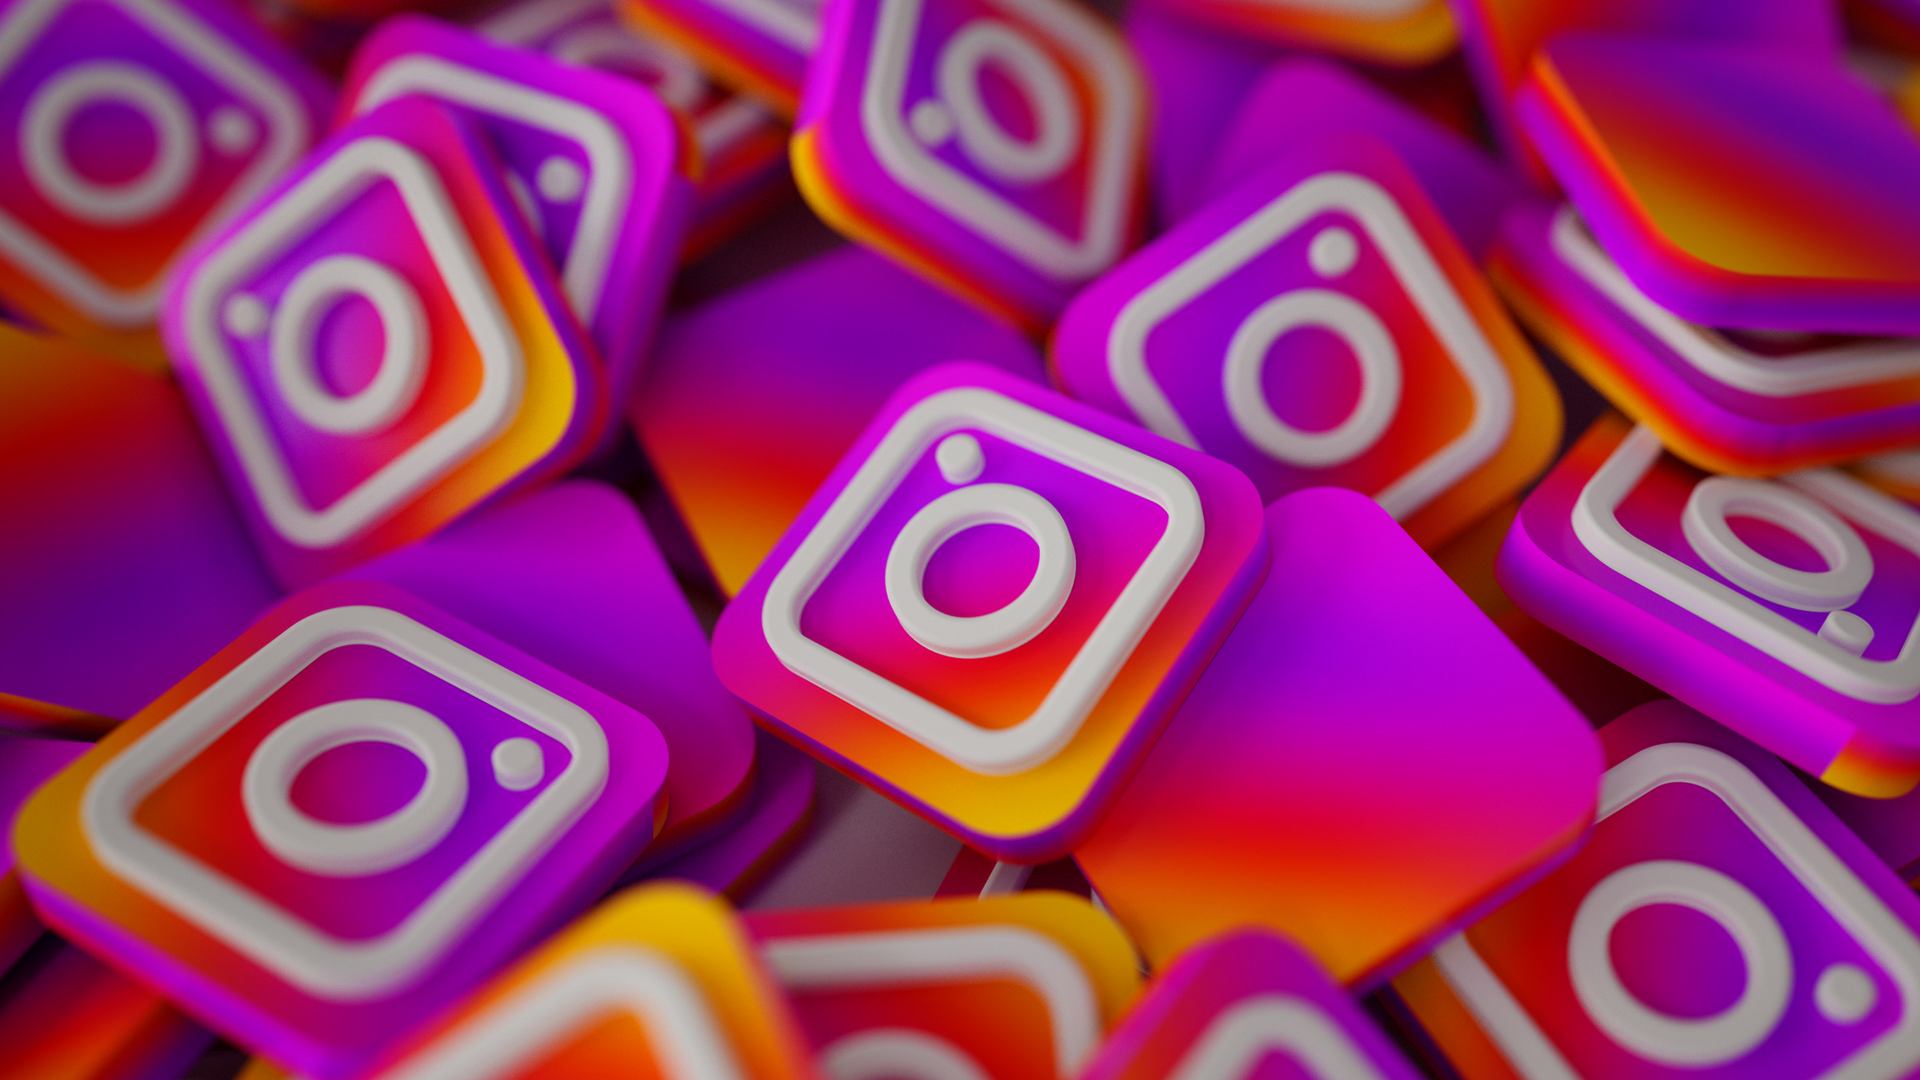 How To Get 50k Followers On Instagram For Free